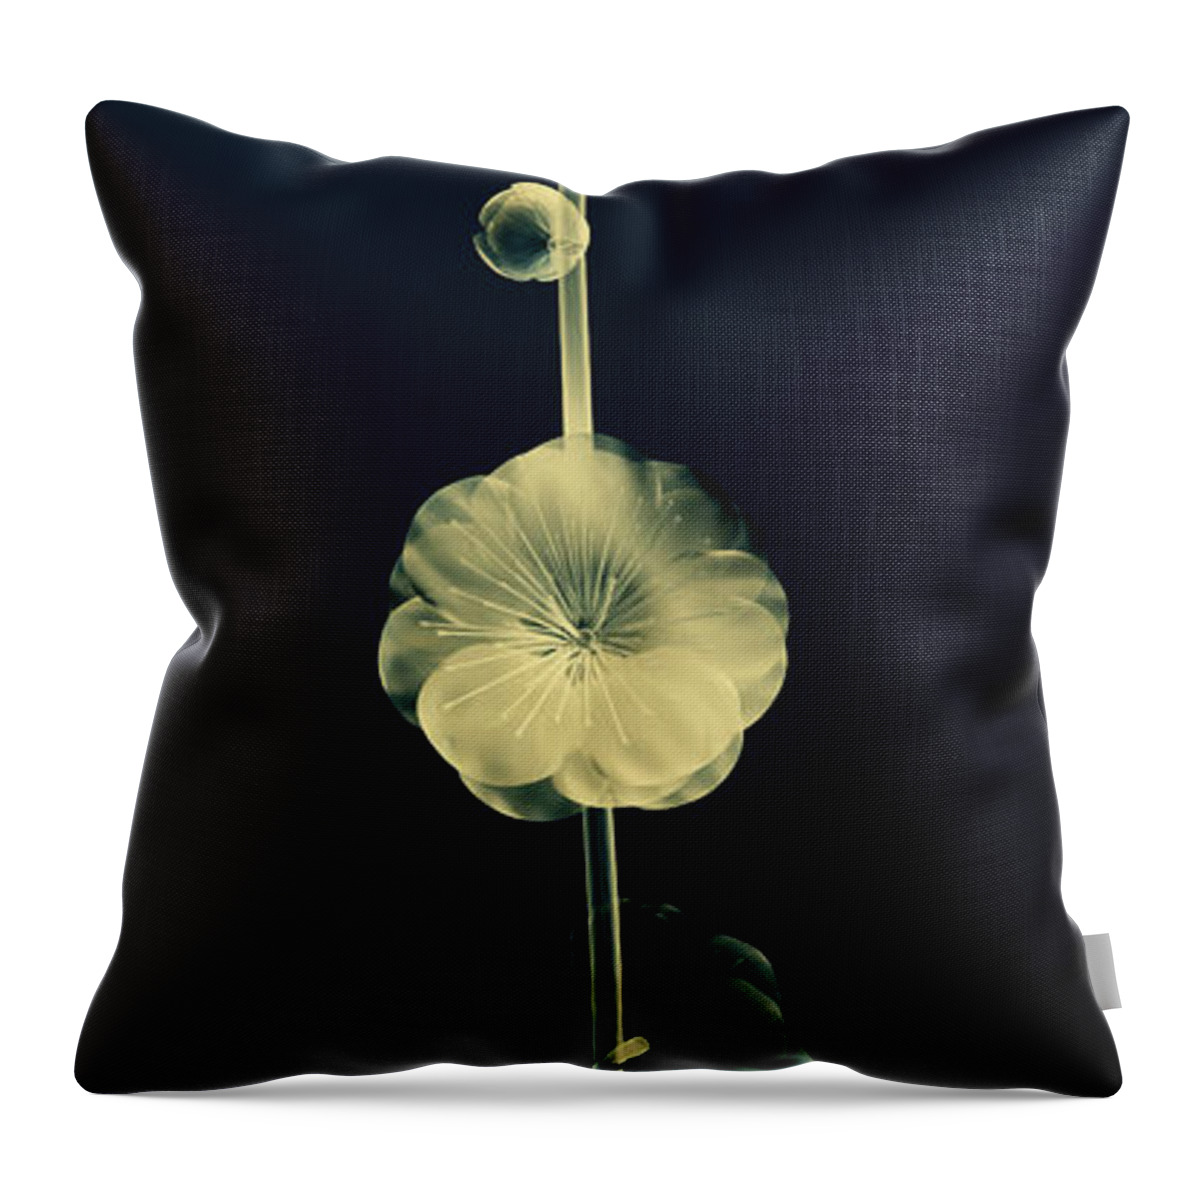 Art Throw Pillow featuring the digital art Botanical Study 6 by Brian Drake - Printscapes